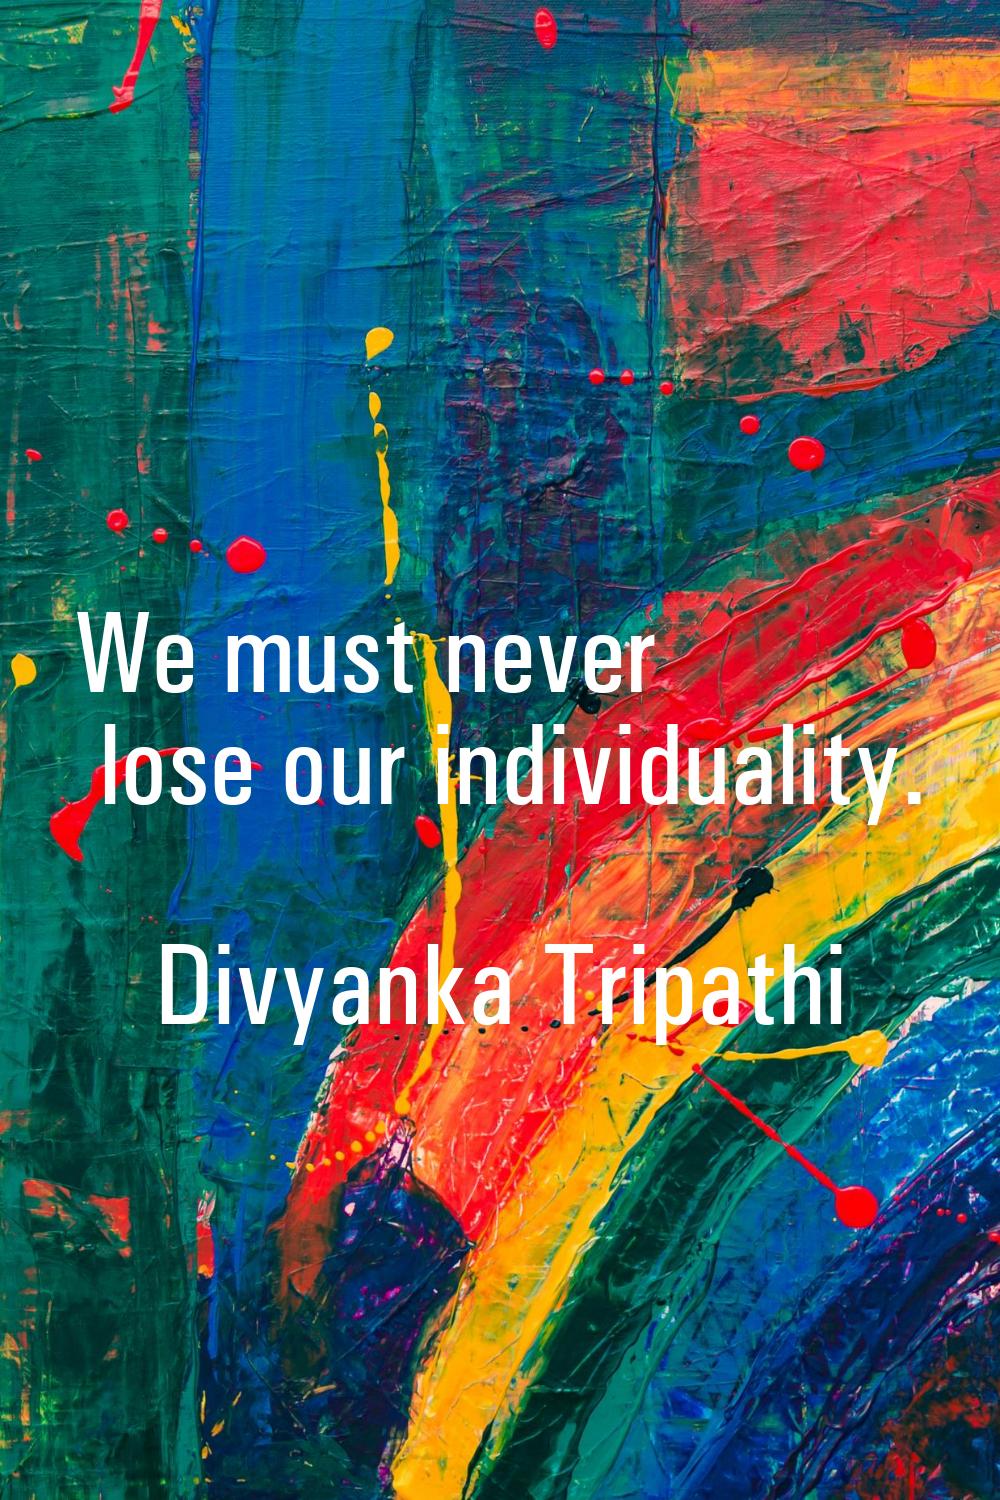 We must never lose our individuality.